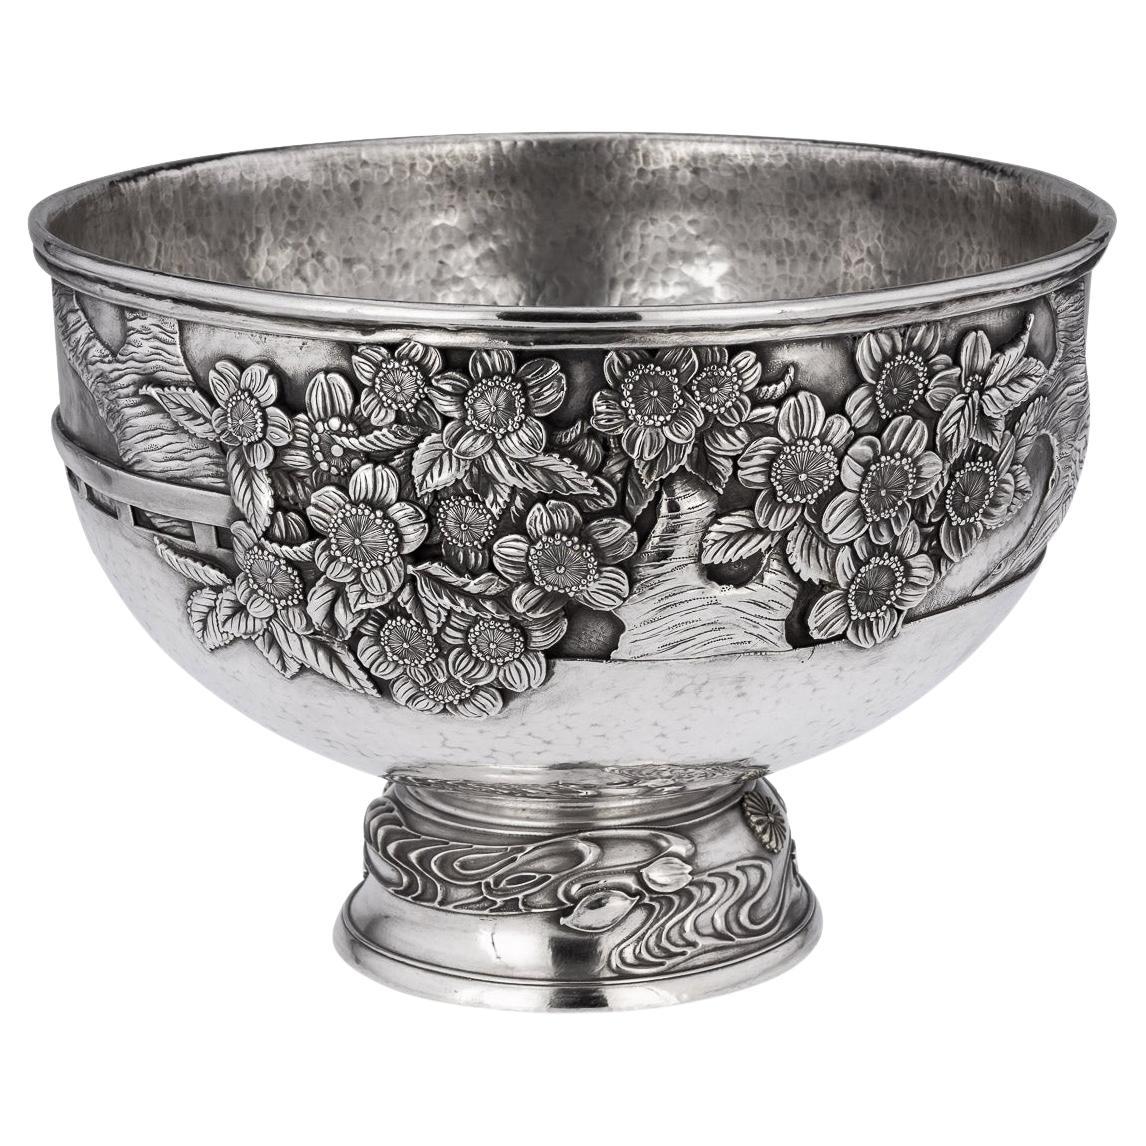 20th Century Japanese Monumental Meiji Period Solid Silver Bowl, C.1900